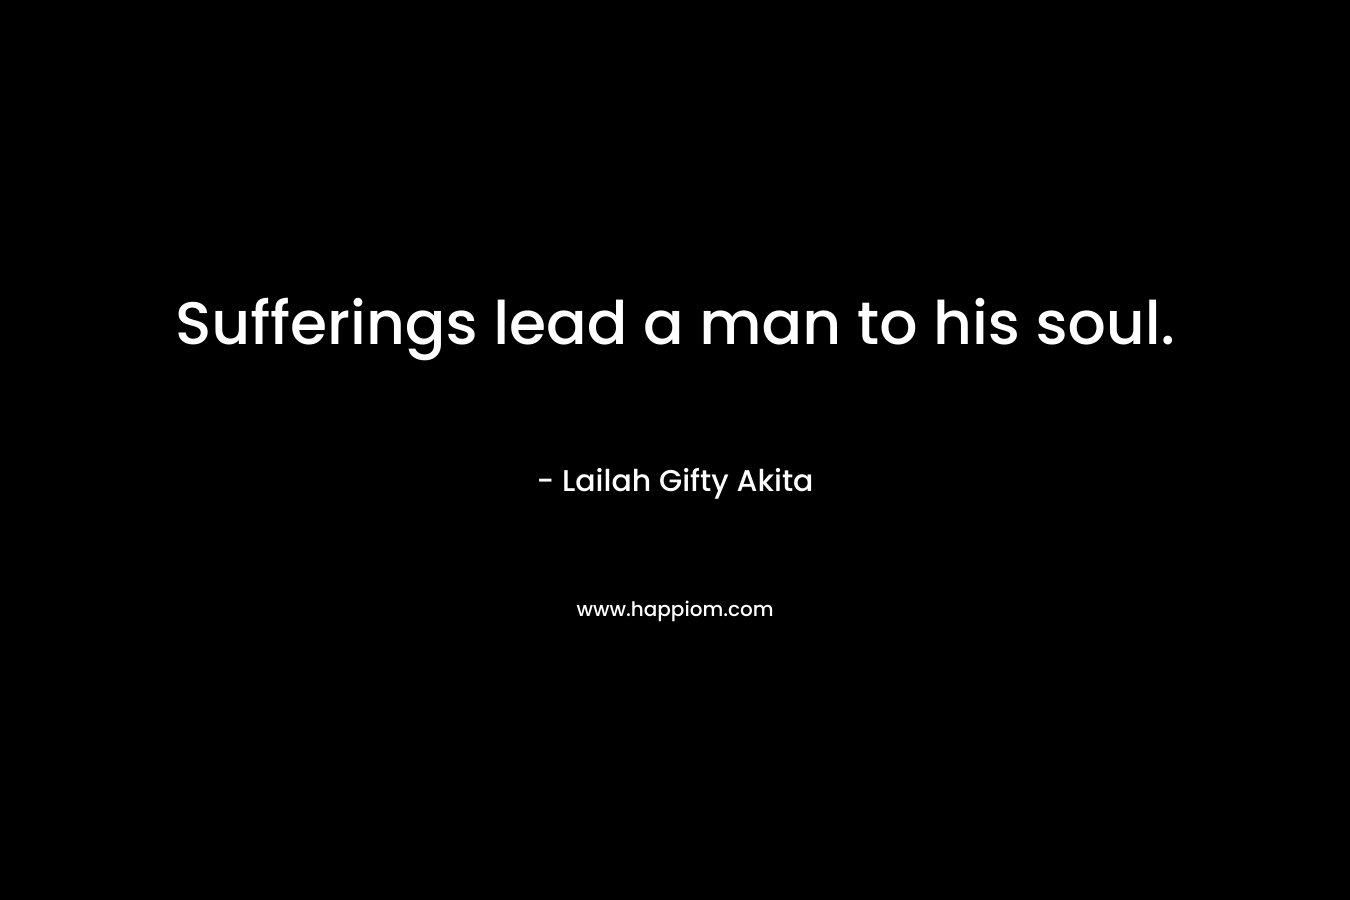 Sufferings lead a man to his soul.